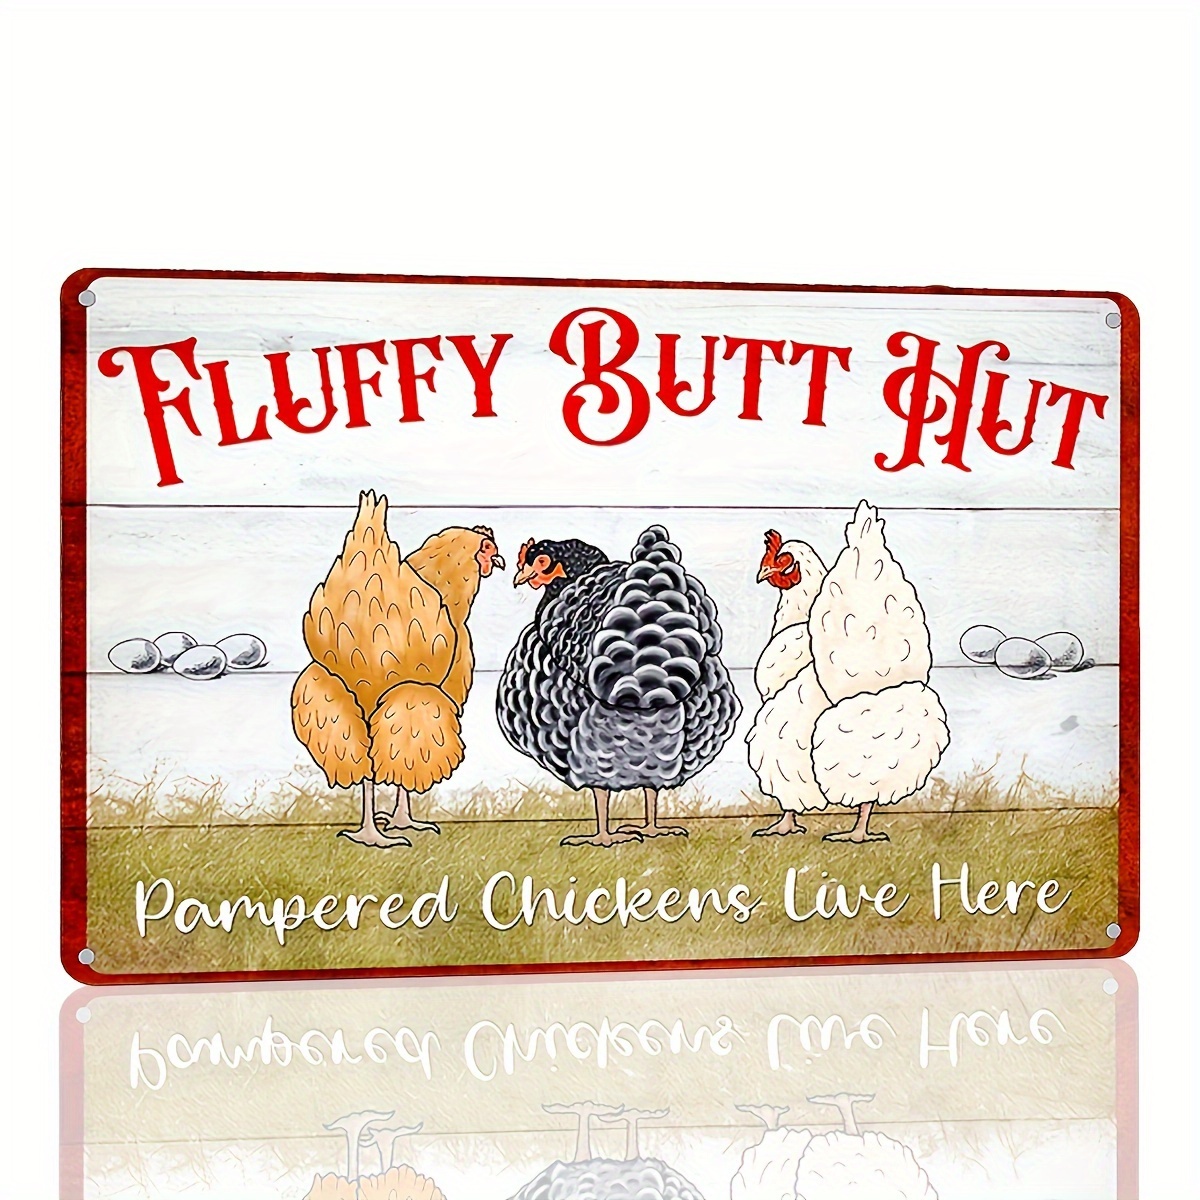 

Fluffy Butt Hut Vintage Metal Tin Sign (12x8") - Humorous Chicken Coop Decor, Farmhouse Kitchen Wall Art, Rustic Home Accessory